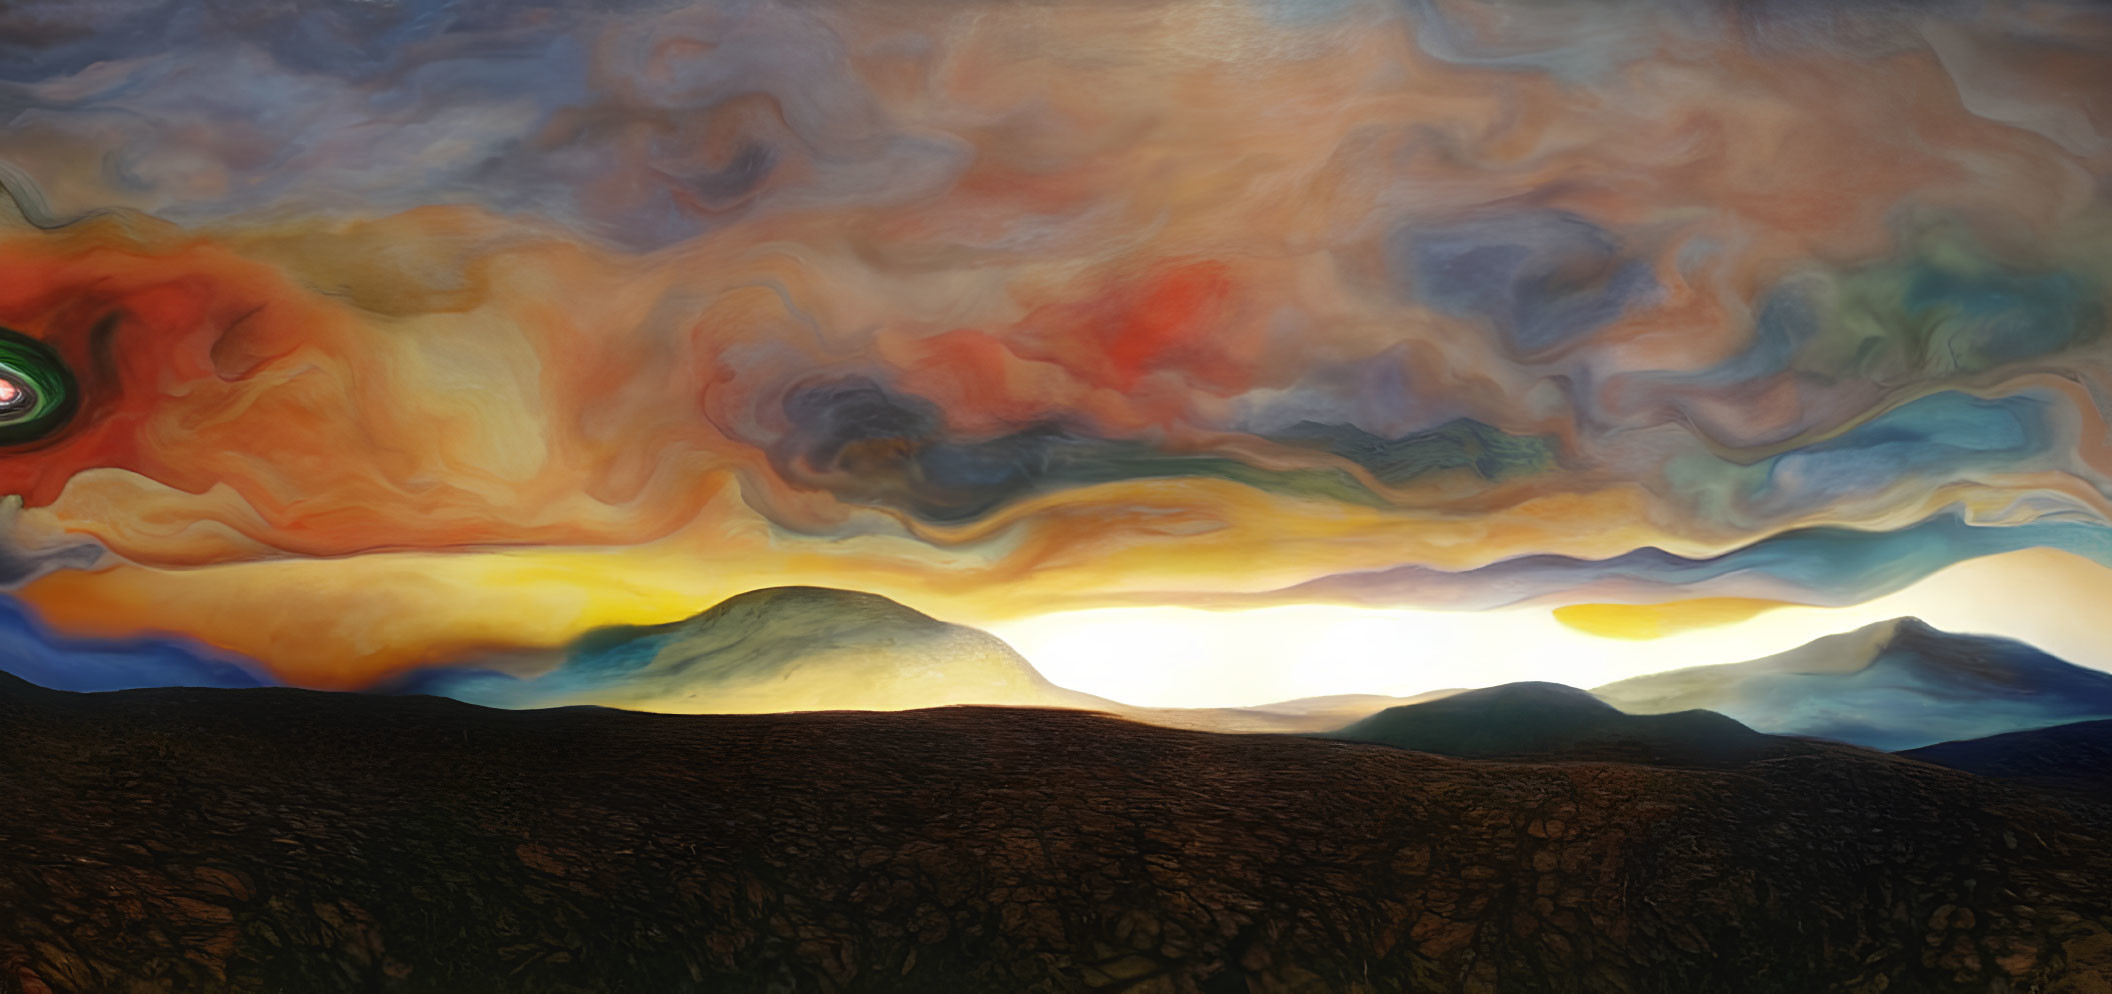 Surreal painted landscape with vibrant swirling clouds above silhouetted mountains at sunset